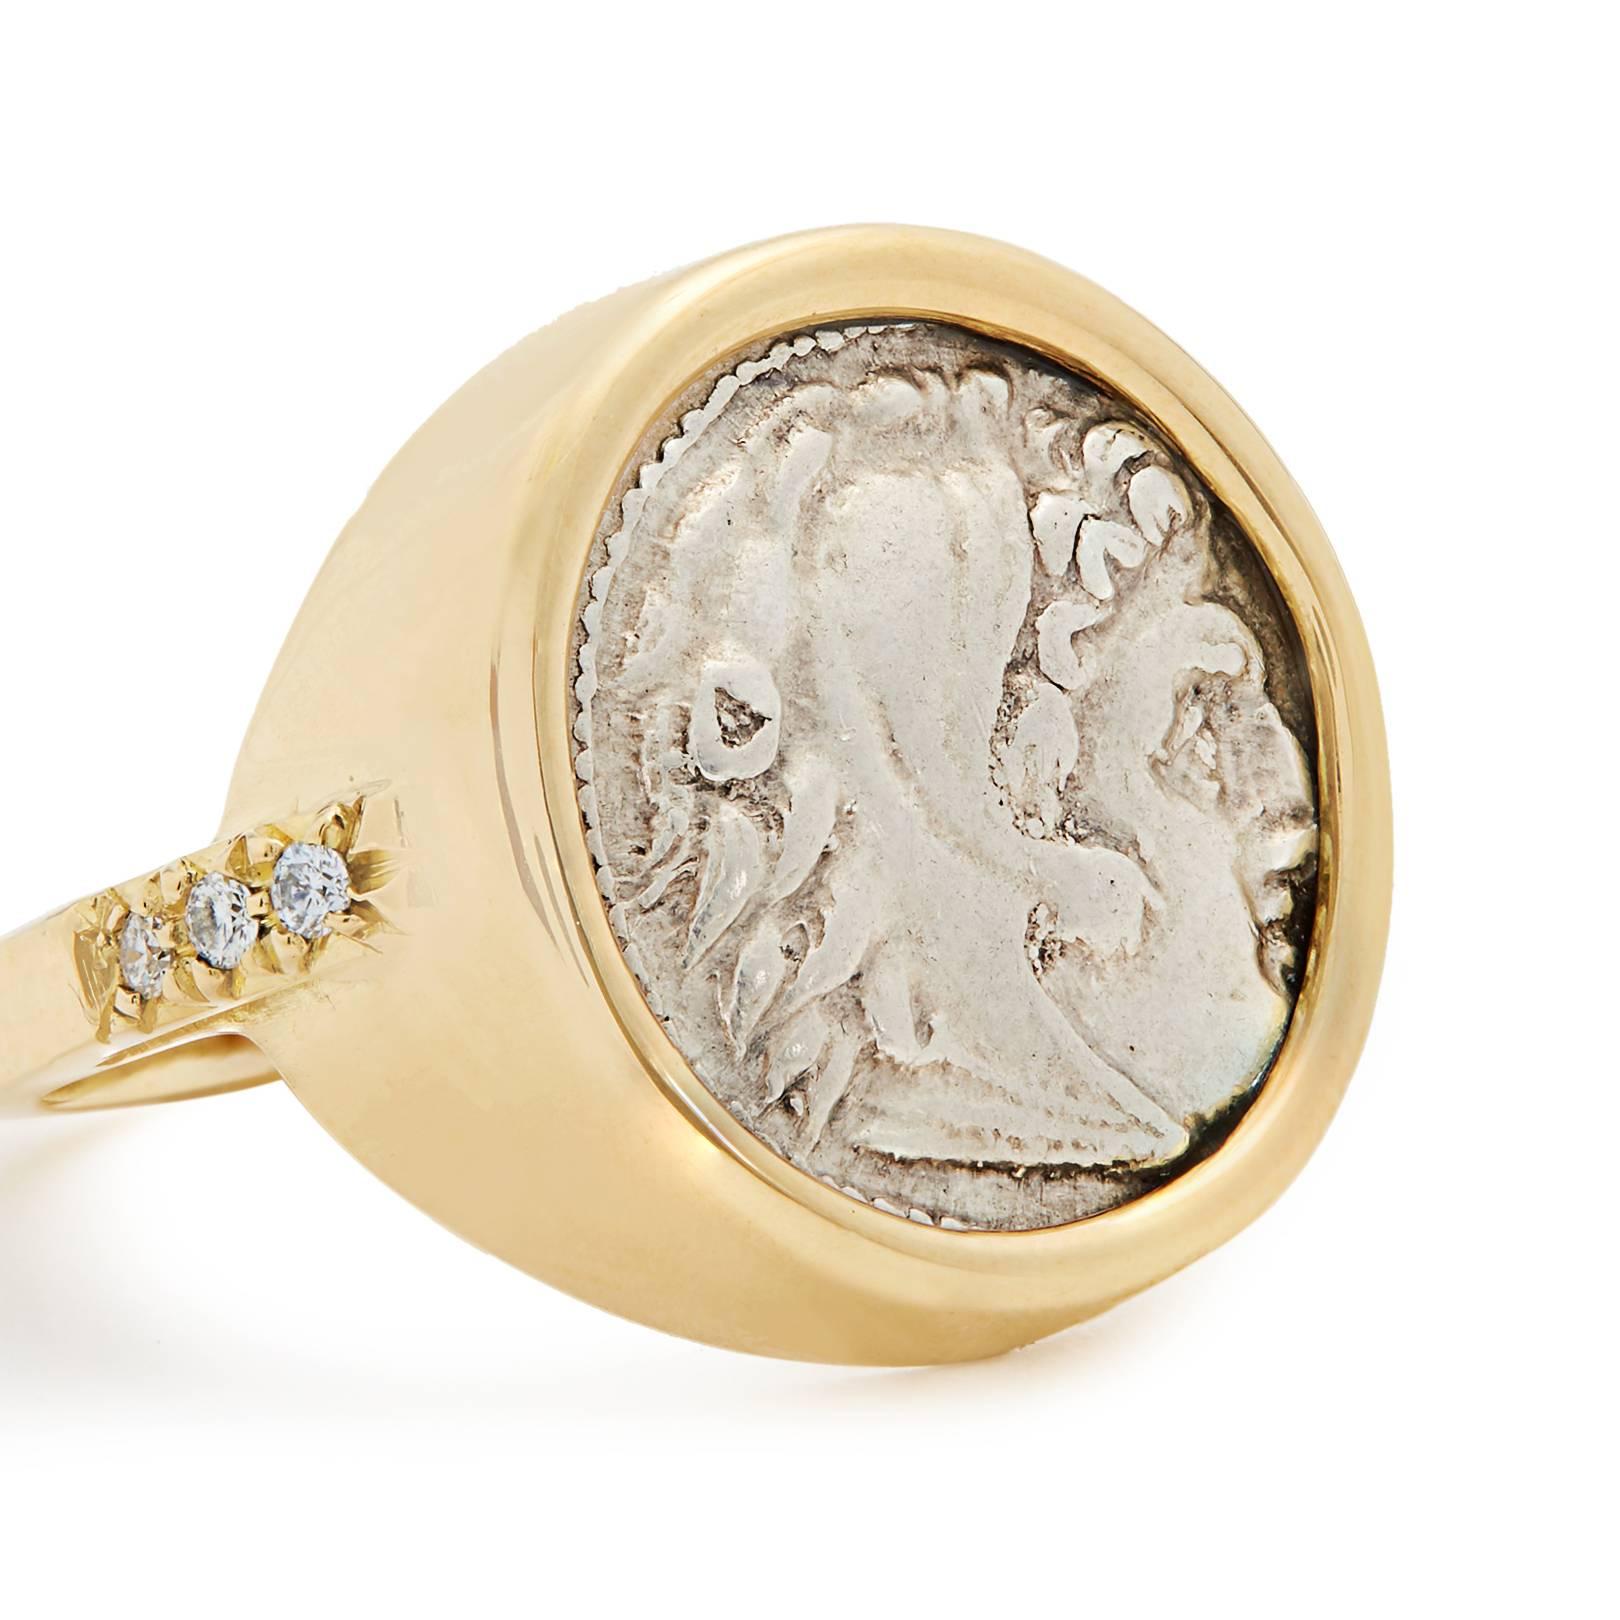 This DUBINI coin ring from the 'Empires' collection features an authentic Macedon silver coin minted circa 336-323 B.C. set in 18K yellow gold with diamonds.

Depicted on the coin: Head of Heracles right wearing lion's scalp; Reverse: Zeus enthroned